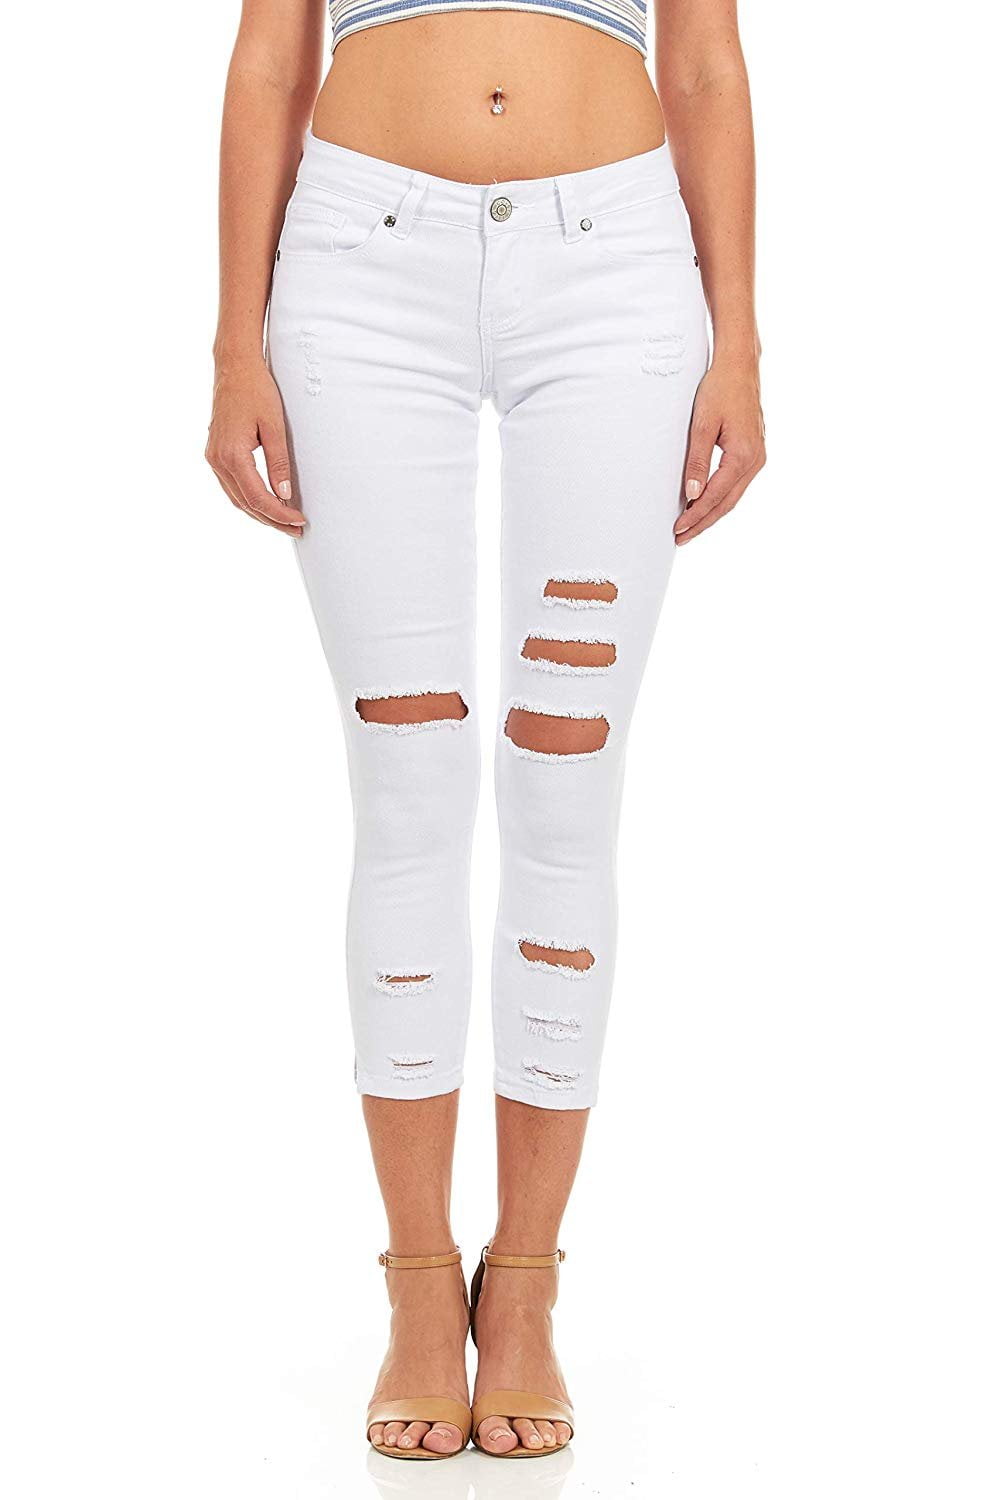 white ripped jeans girls